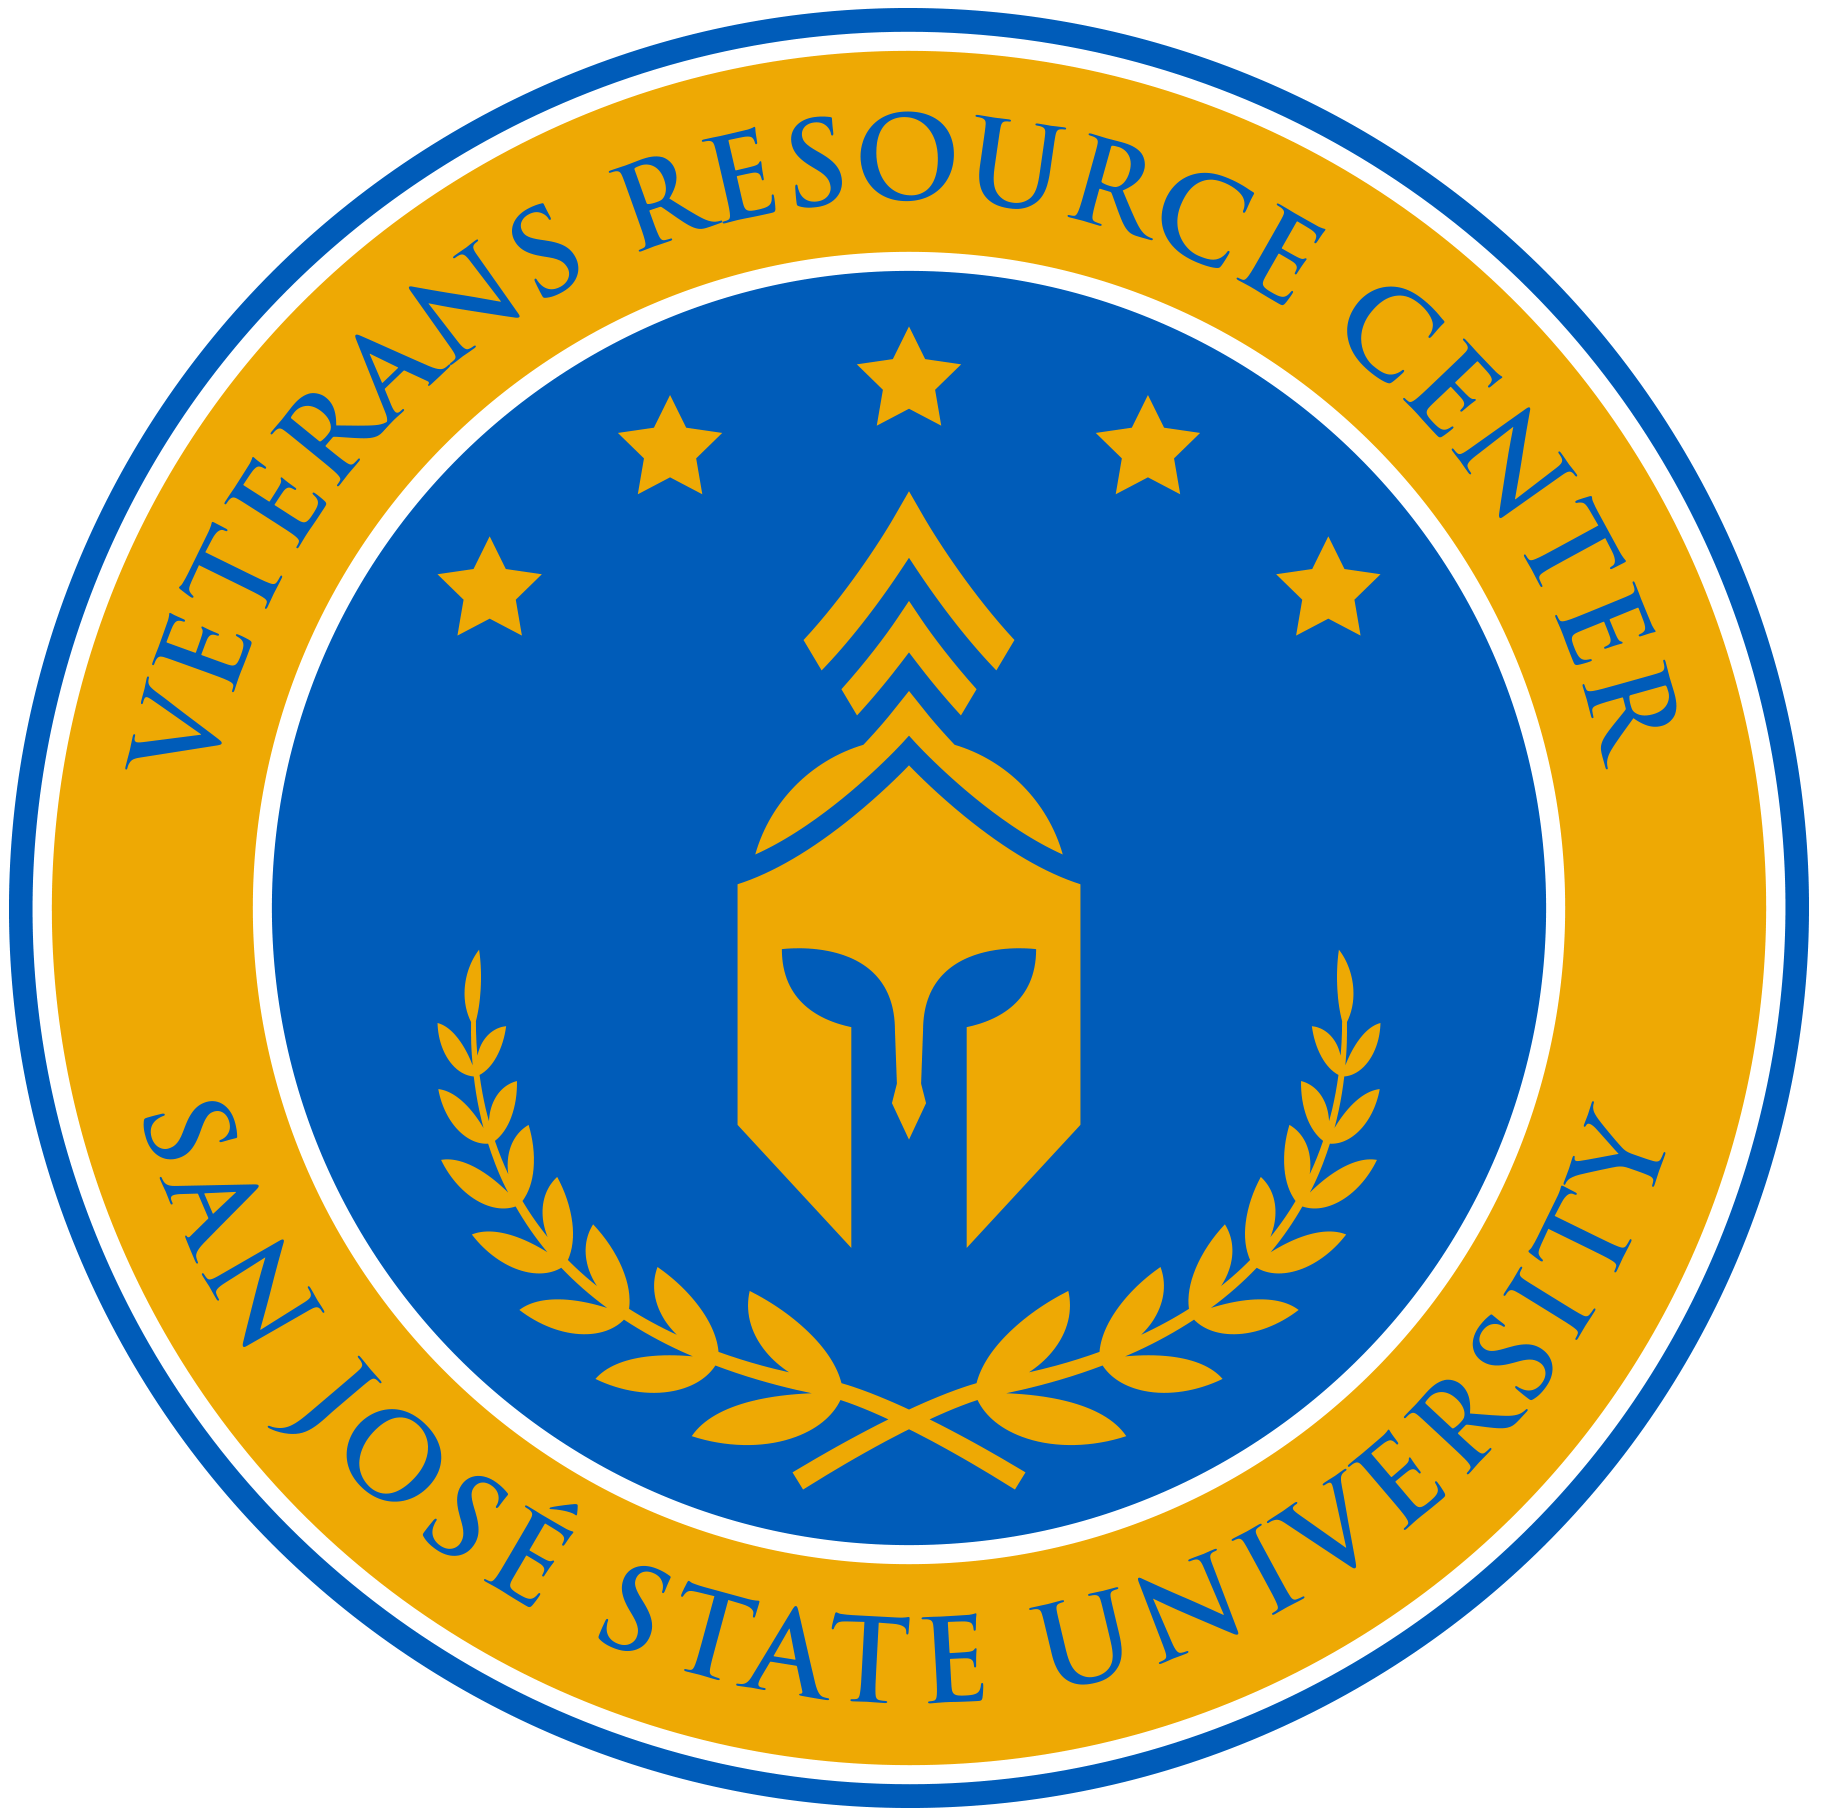 Image of Veteran's Resource Center logo - a gold circle with blue outline and a blue image of a spartan in the middle with stars and leaves